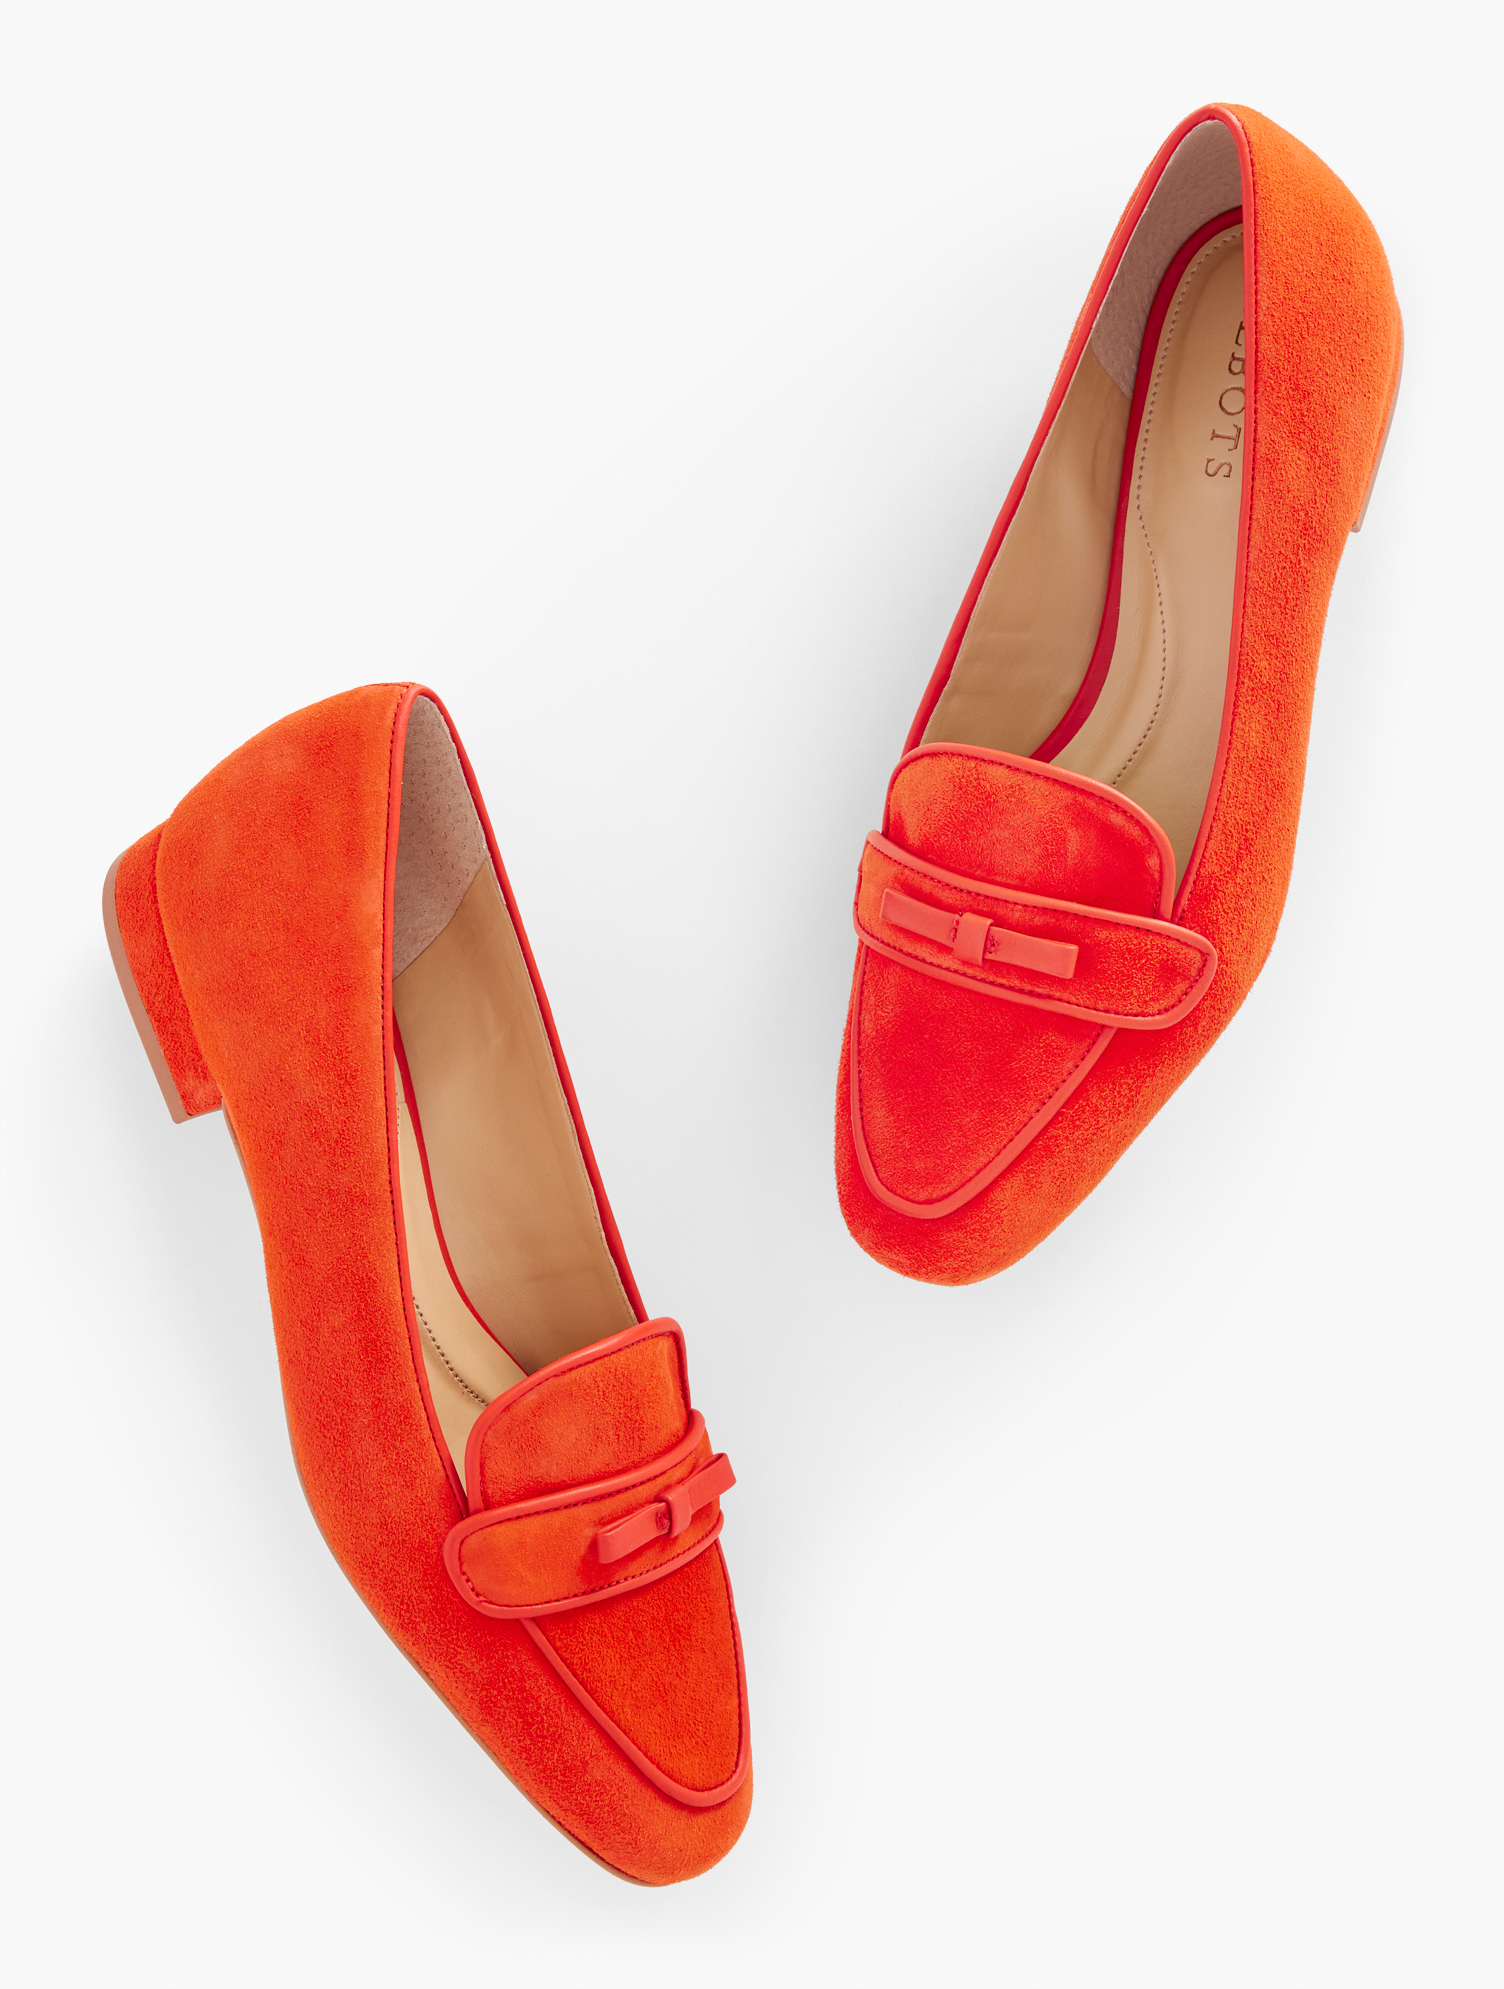 Talbots Jane Bow Loafers - Suede - Clementine - 8m